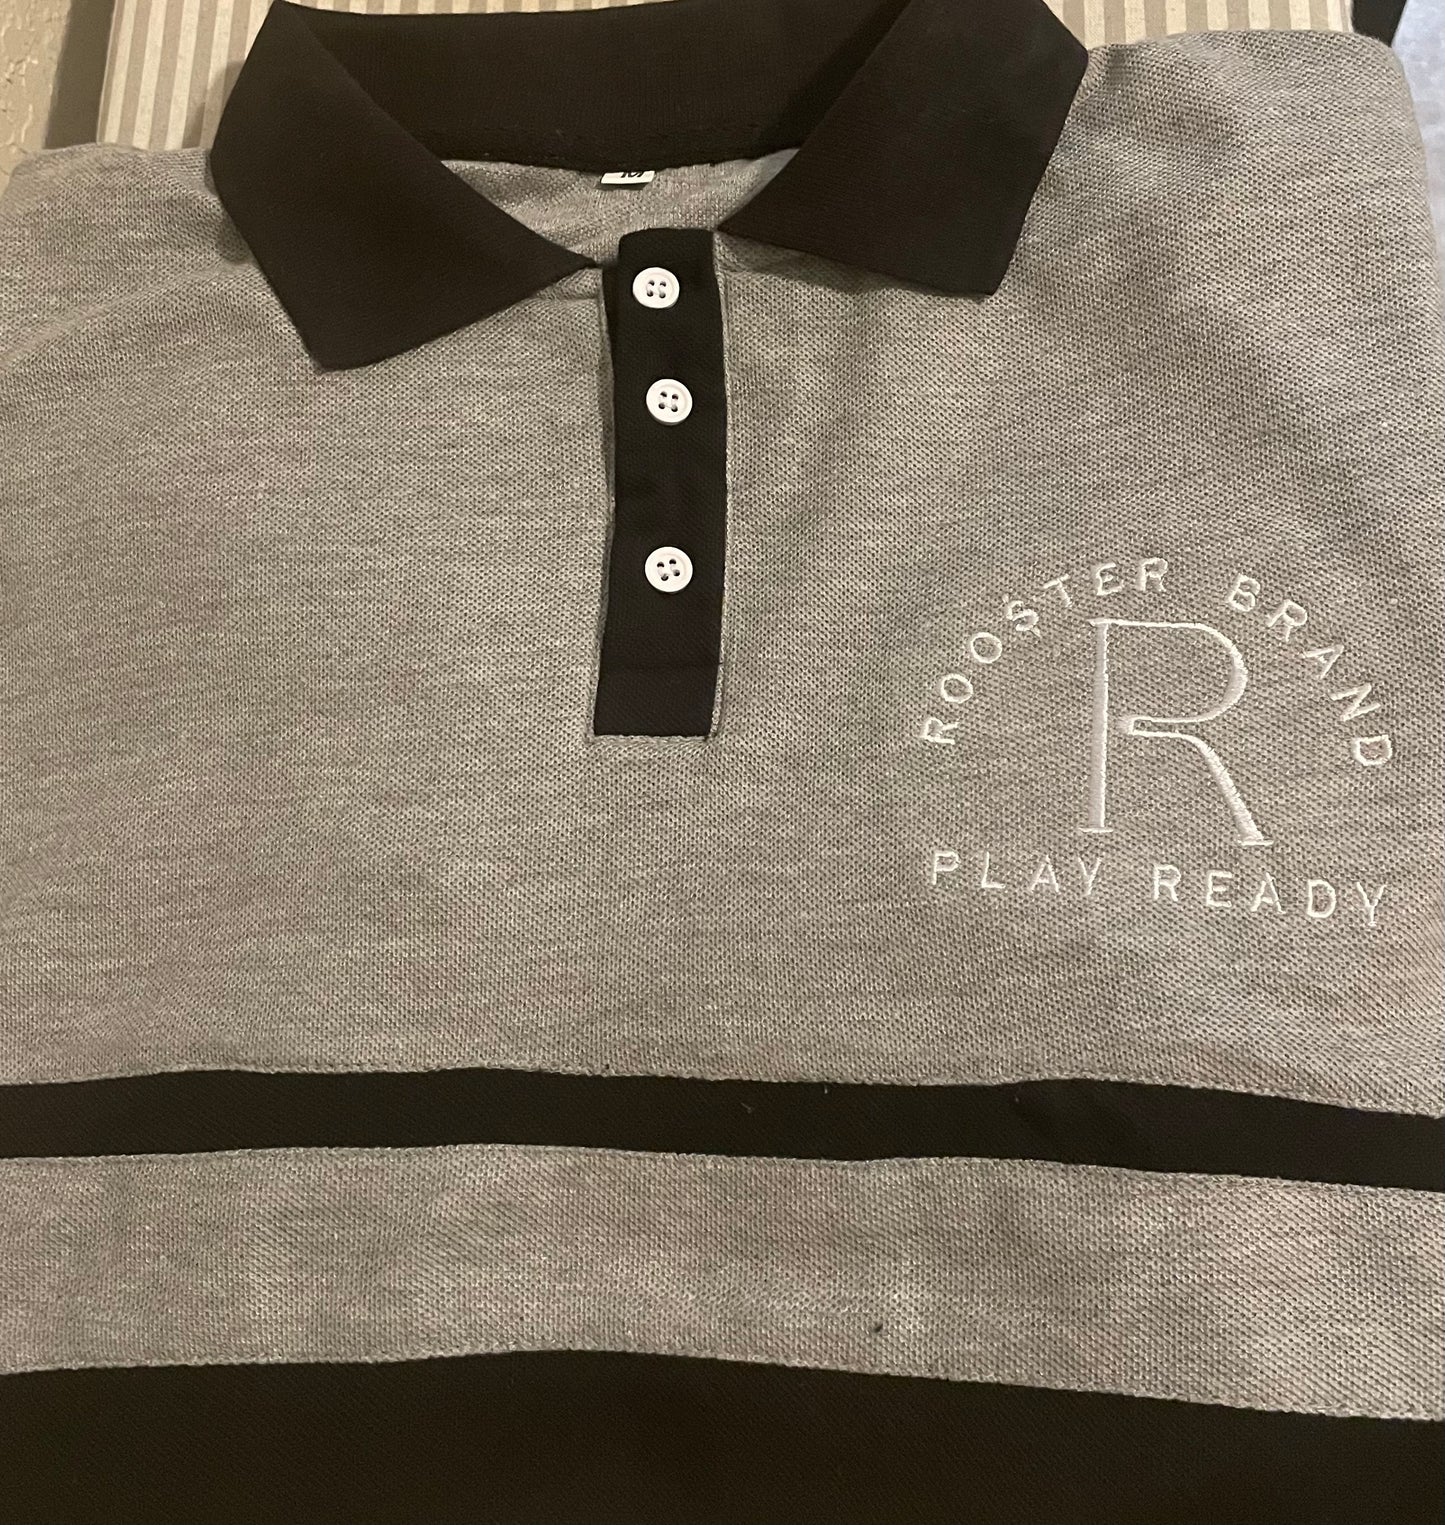 **PROMO** Just $12.99 Roo$ter Brand Custom Embroidered Logo Golf Polo Grey/Black Chest Logo